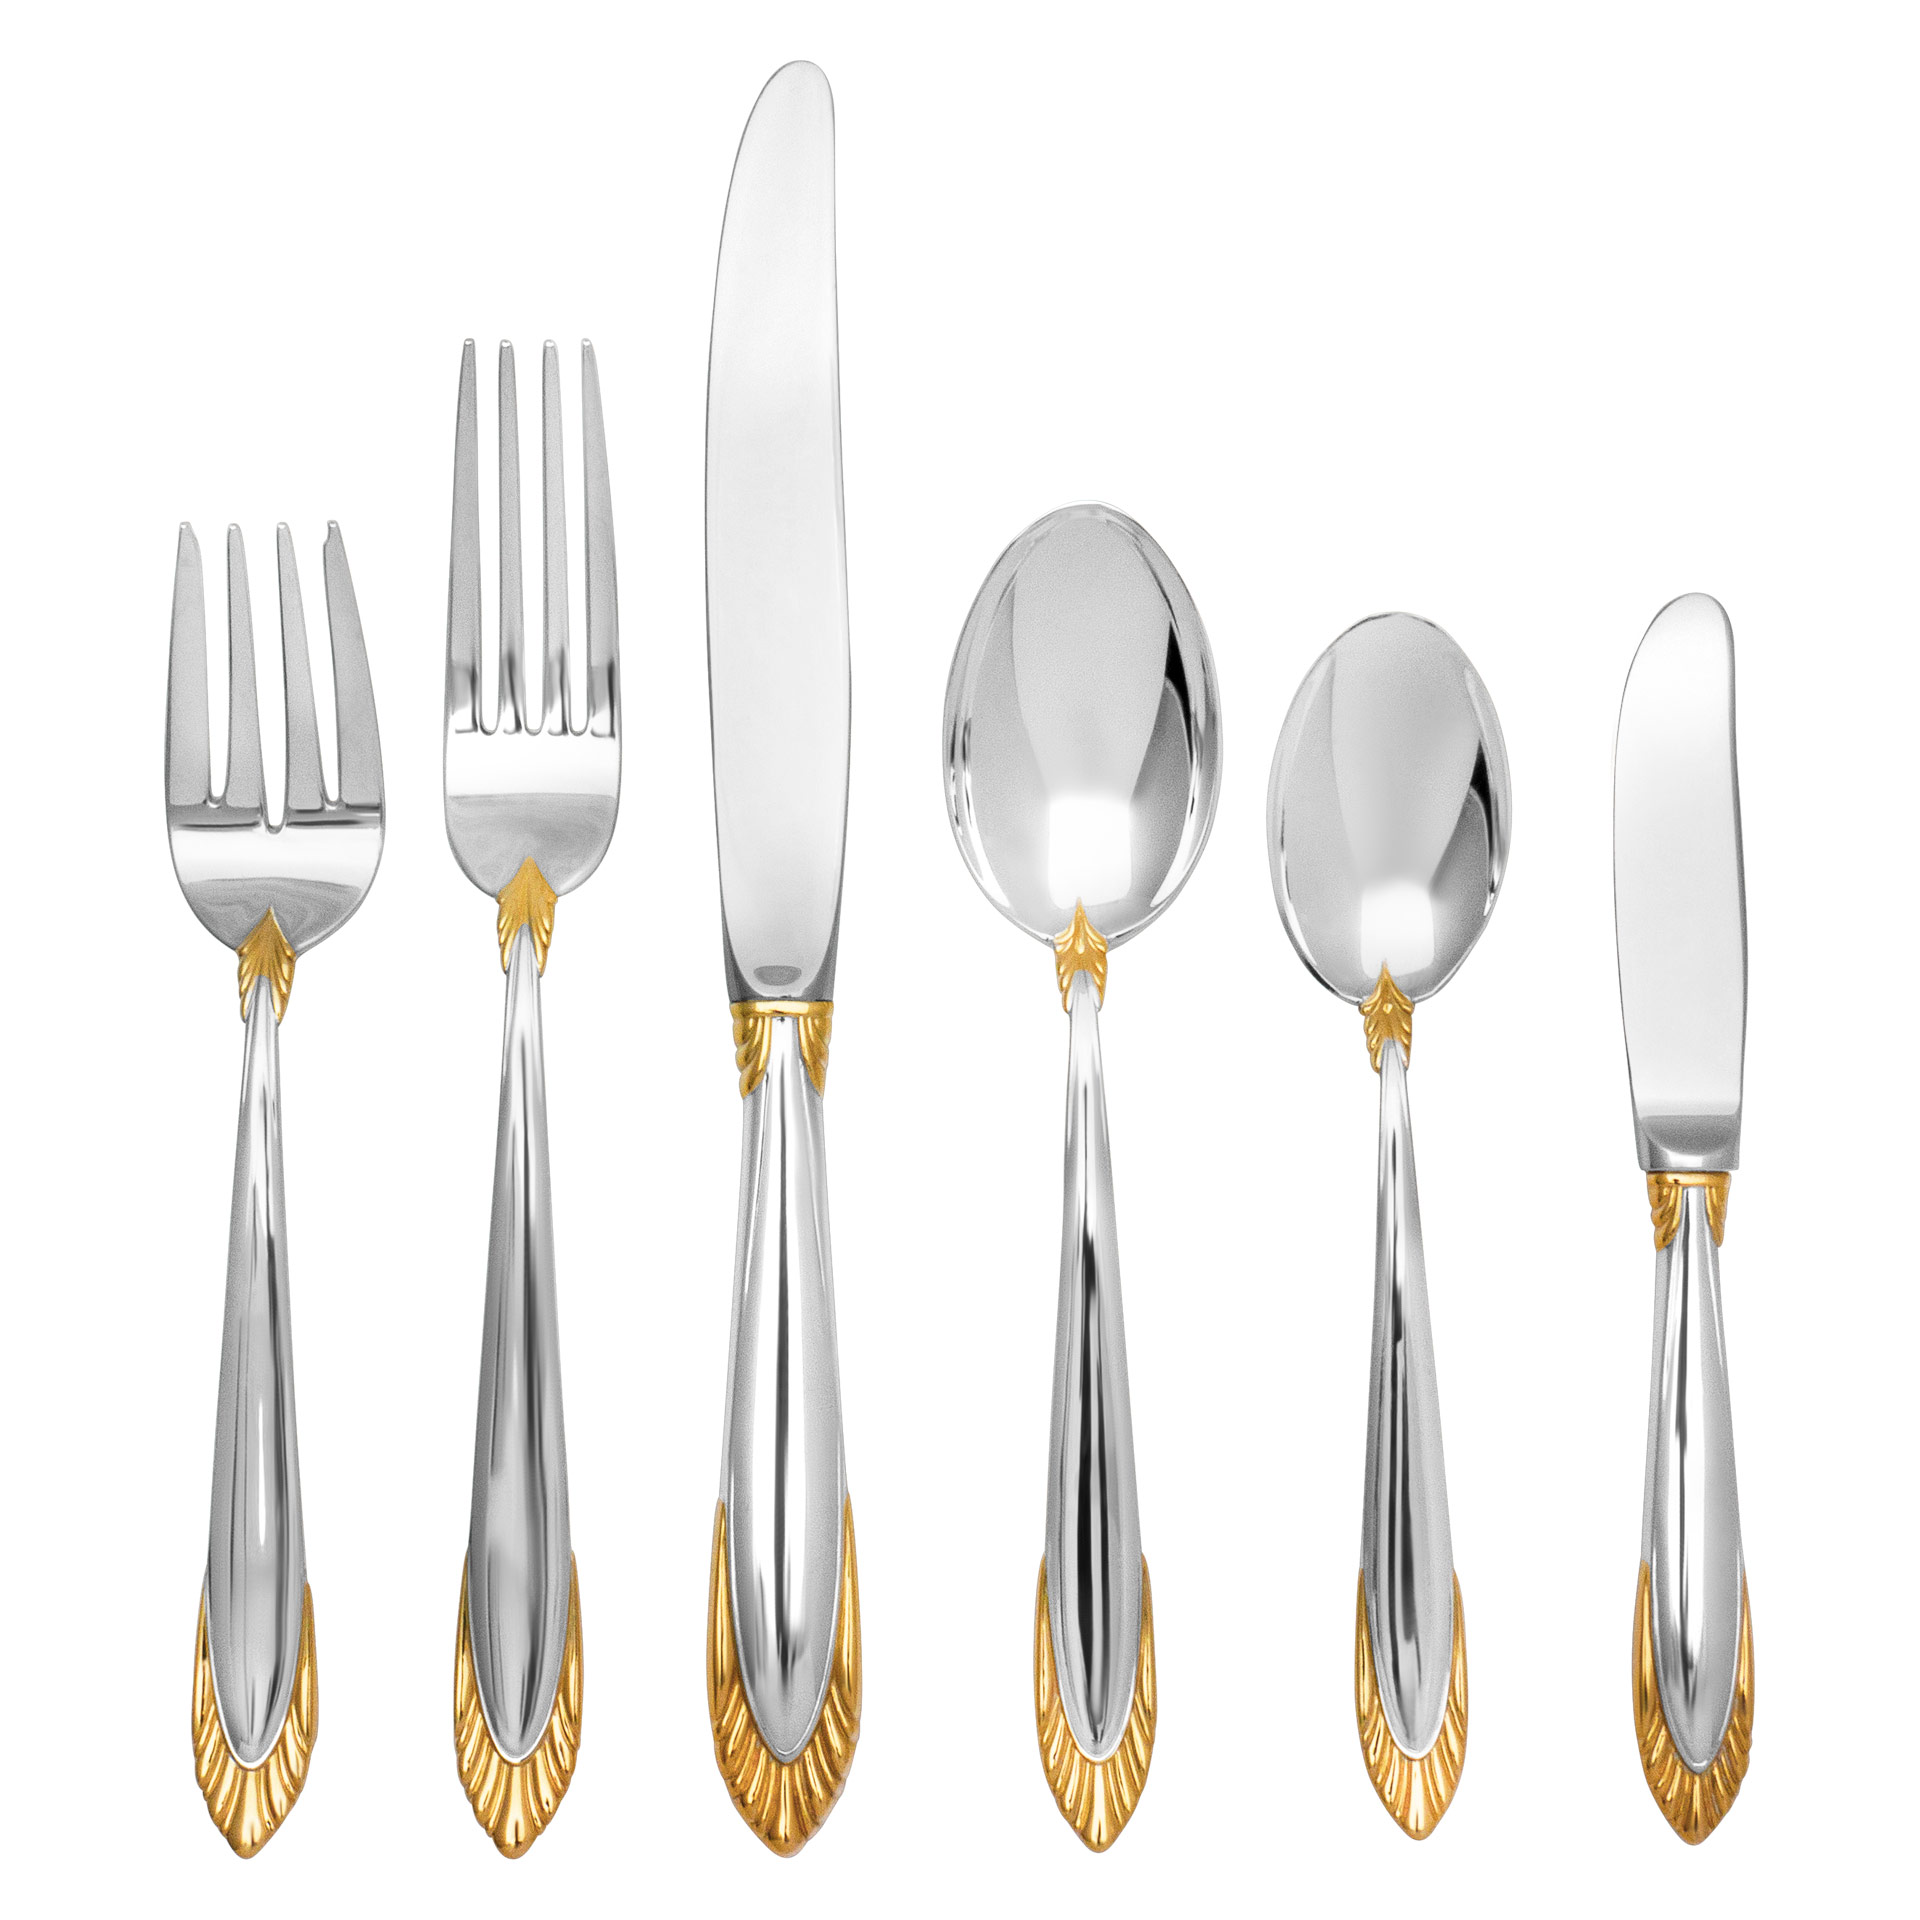 "REGENCY SHELL" flatware sterling silver set, patented in 1989 by Lunt Silversmiths-  6 place setting for 12 + 7 serving pieces-  Over 90 oz troy sterling silver image 1